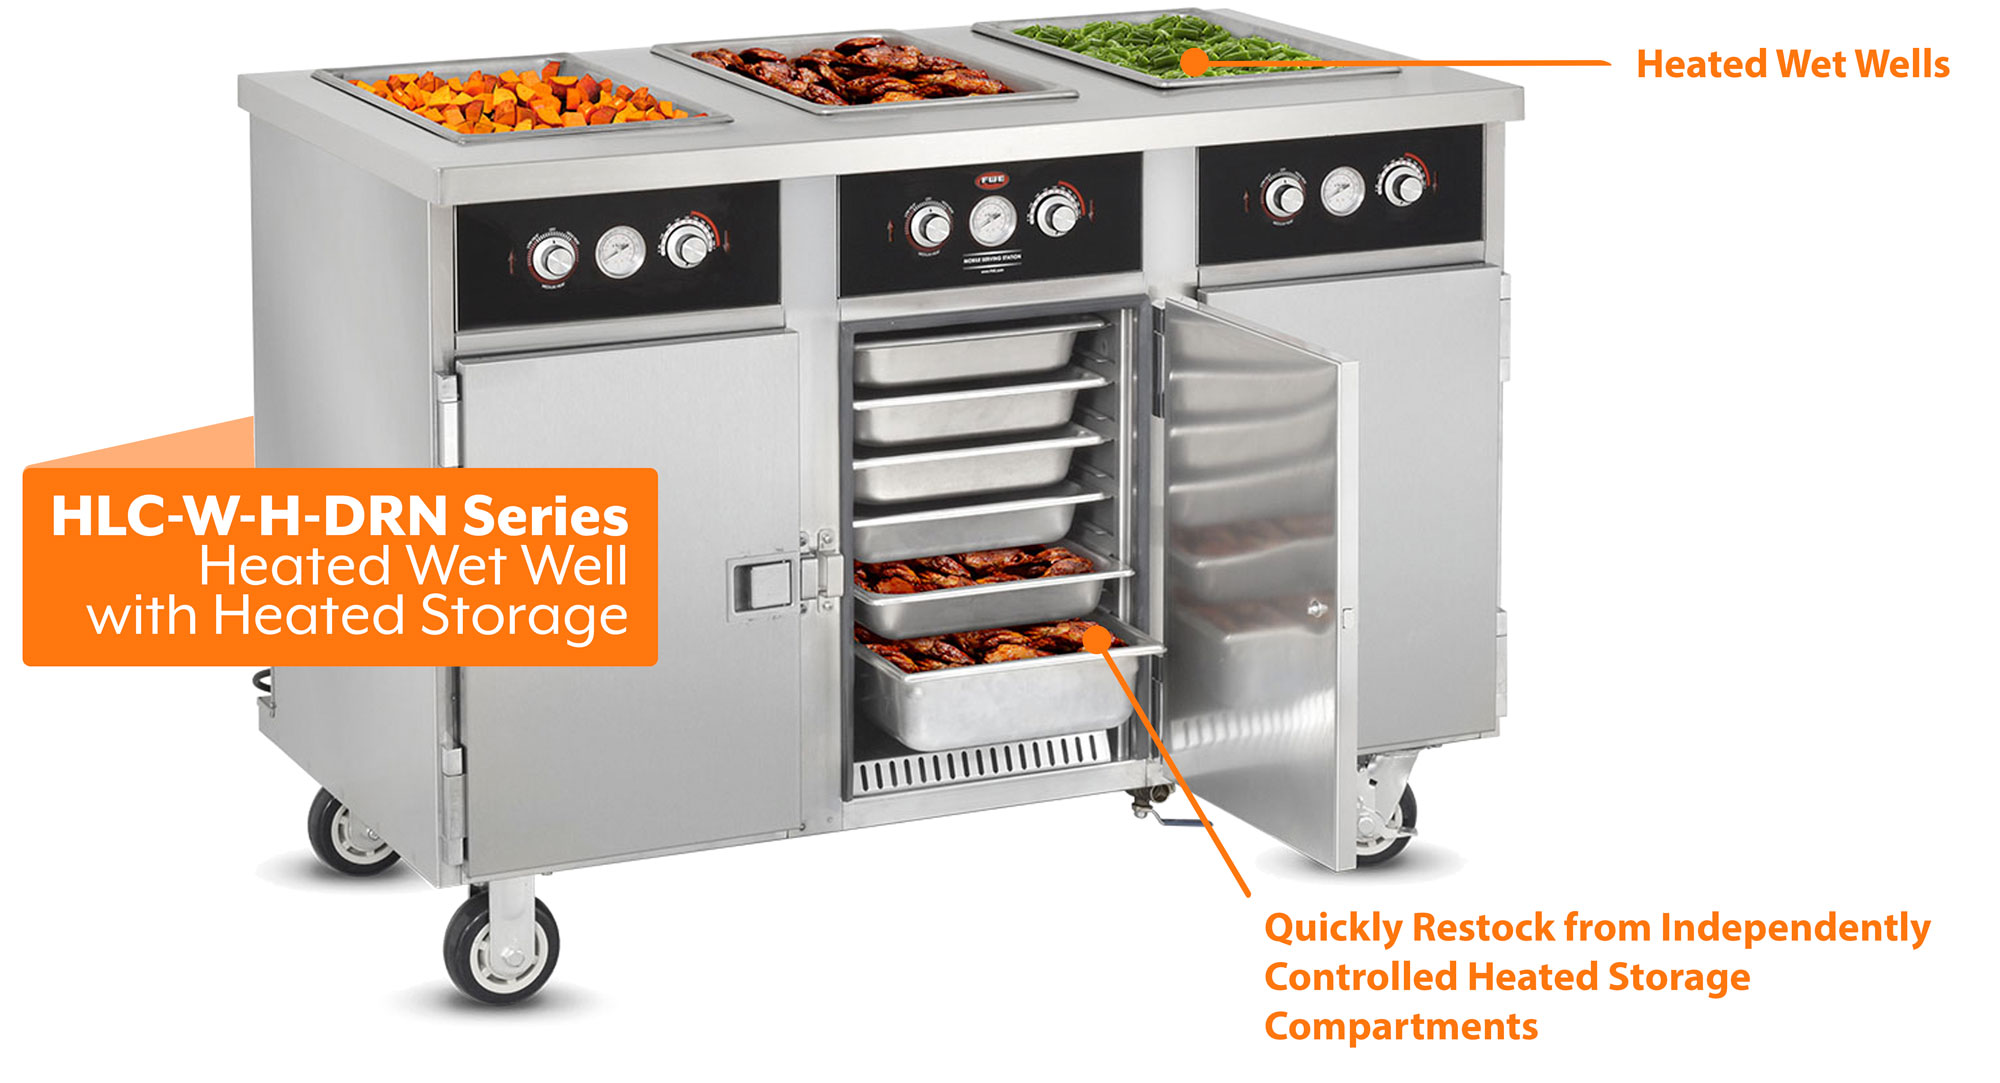 HLC-W-H-DRN Series: Heated Wet Serving Well with Independently Controlled Heated Storage Below